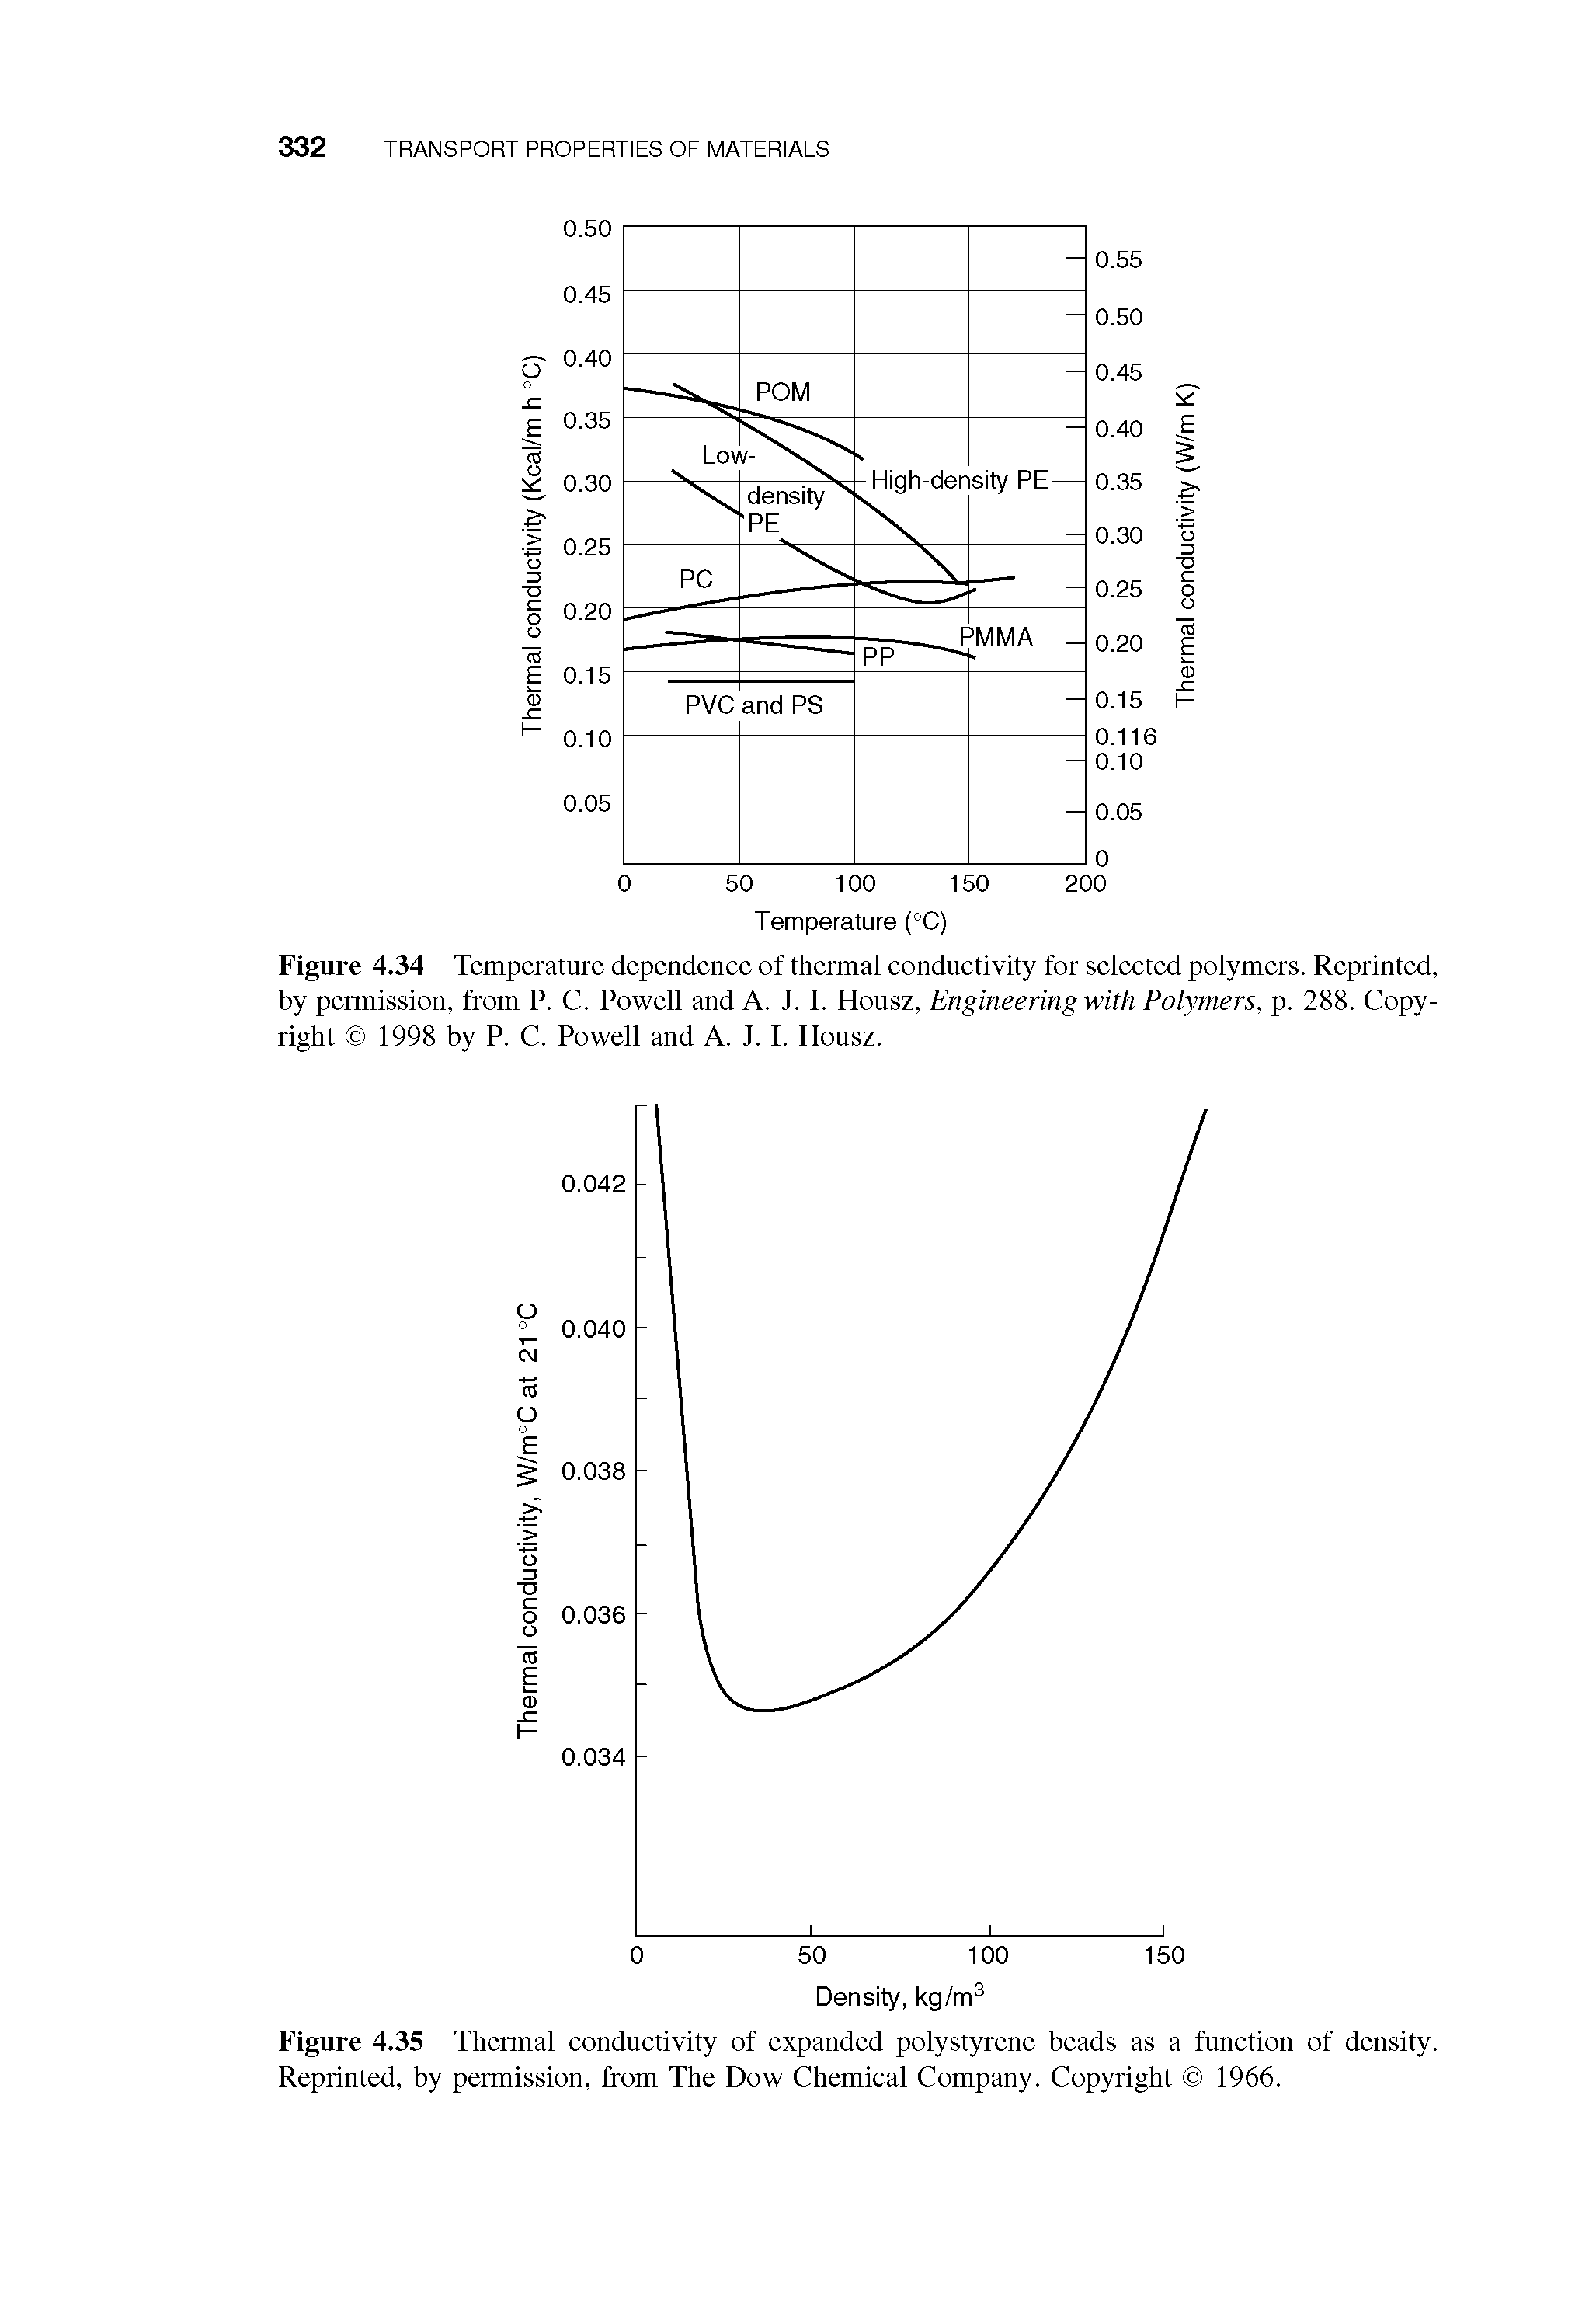 Figure 4.35 Thermal conductivity of expanded polystyrene beads as a function of density. Reprinted, by permission, from The Dow Chemical Company. Copyright 1966.